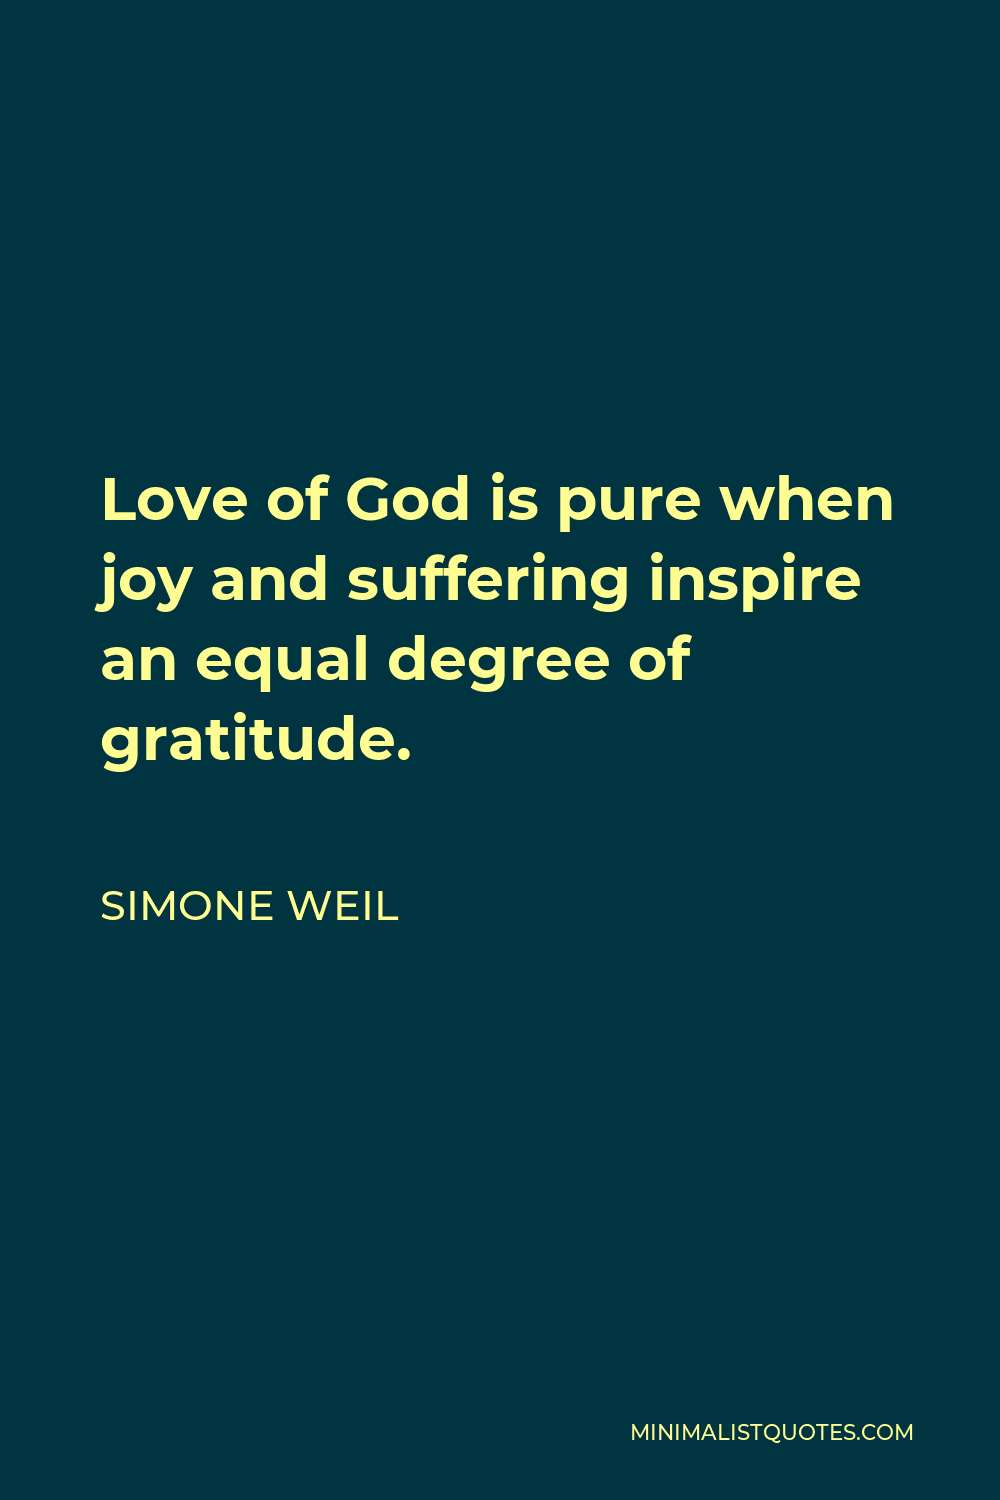 Simone Weil Quote - Love of God is pure when joy and suffering inspire an equal degree of gratitude.